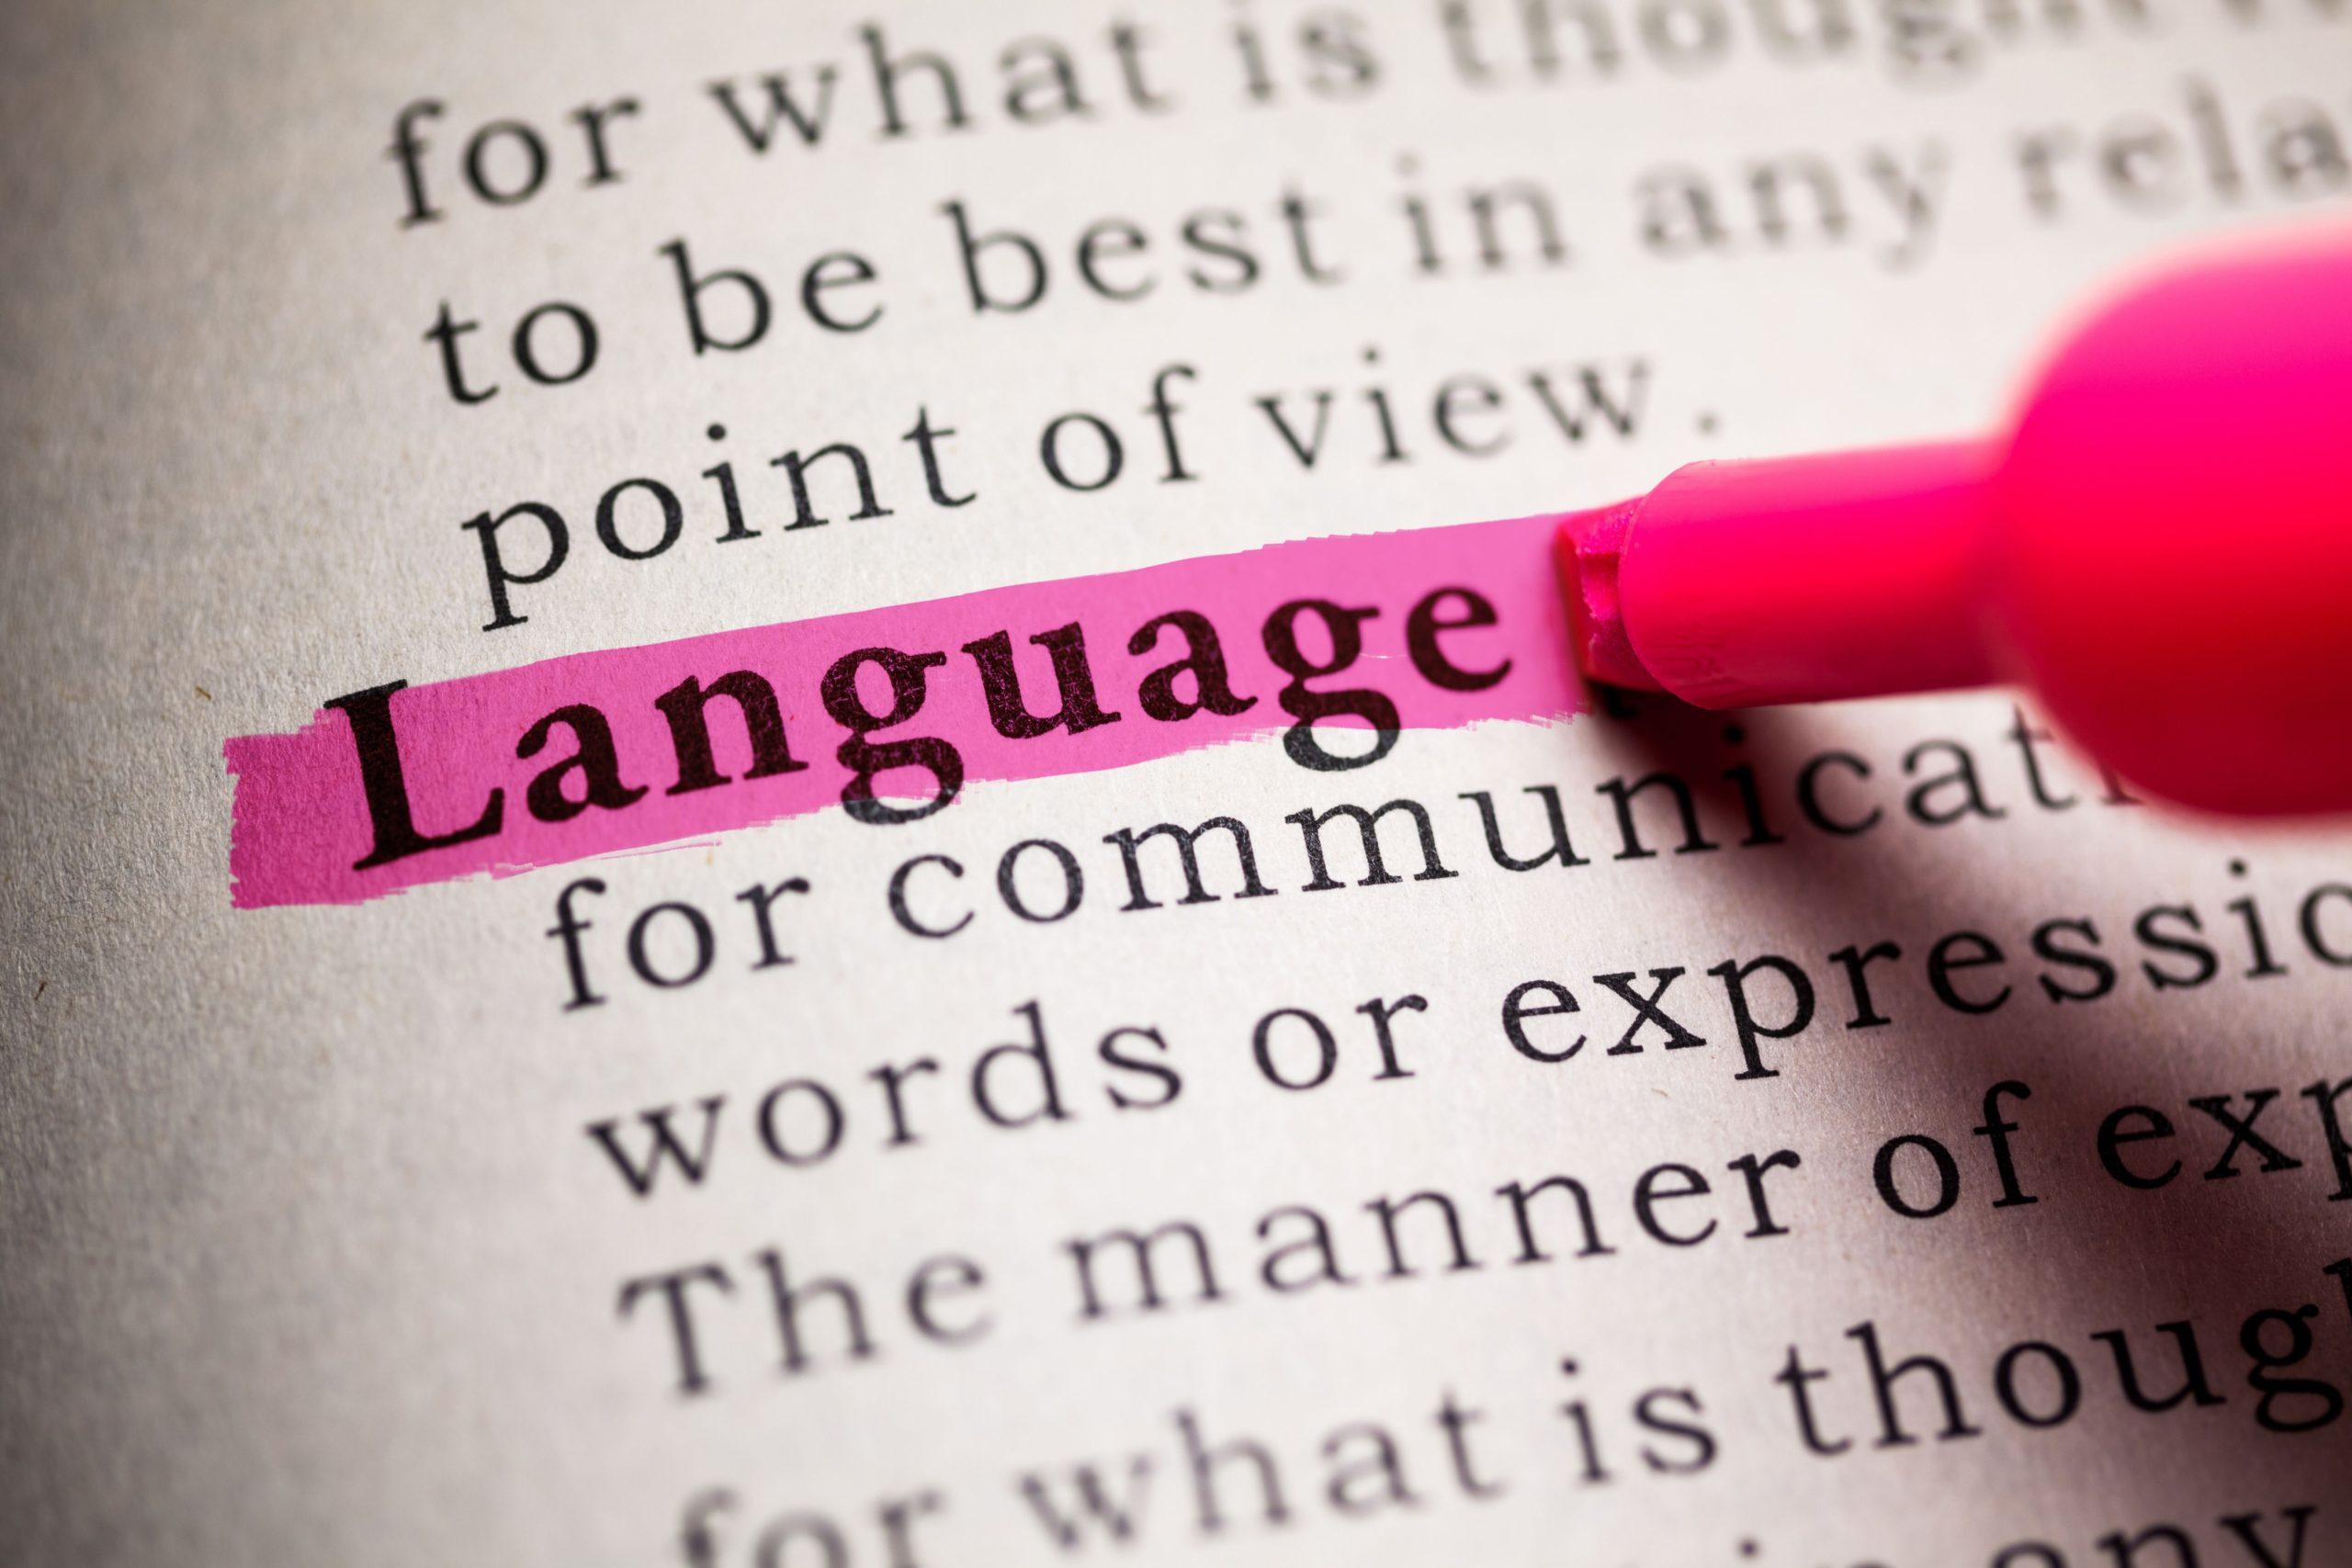 importance of language in communication essay brainly